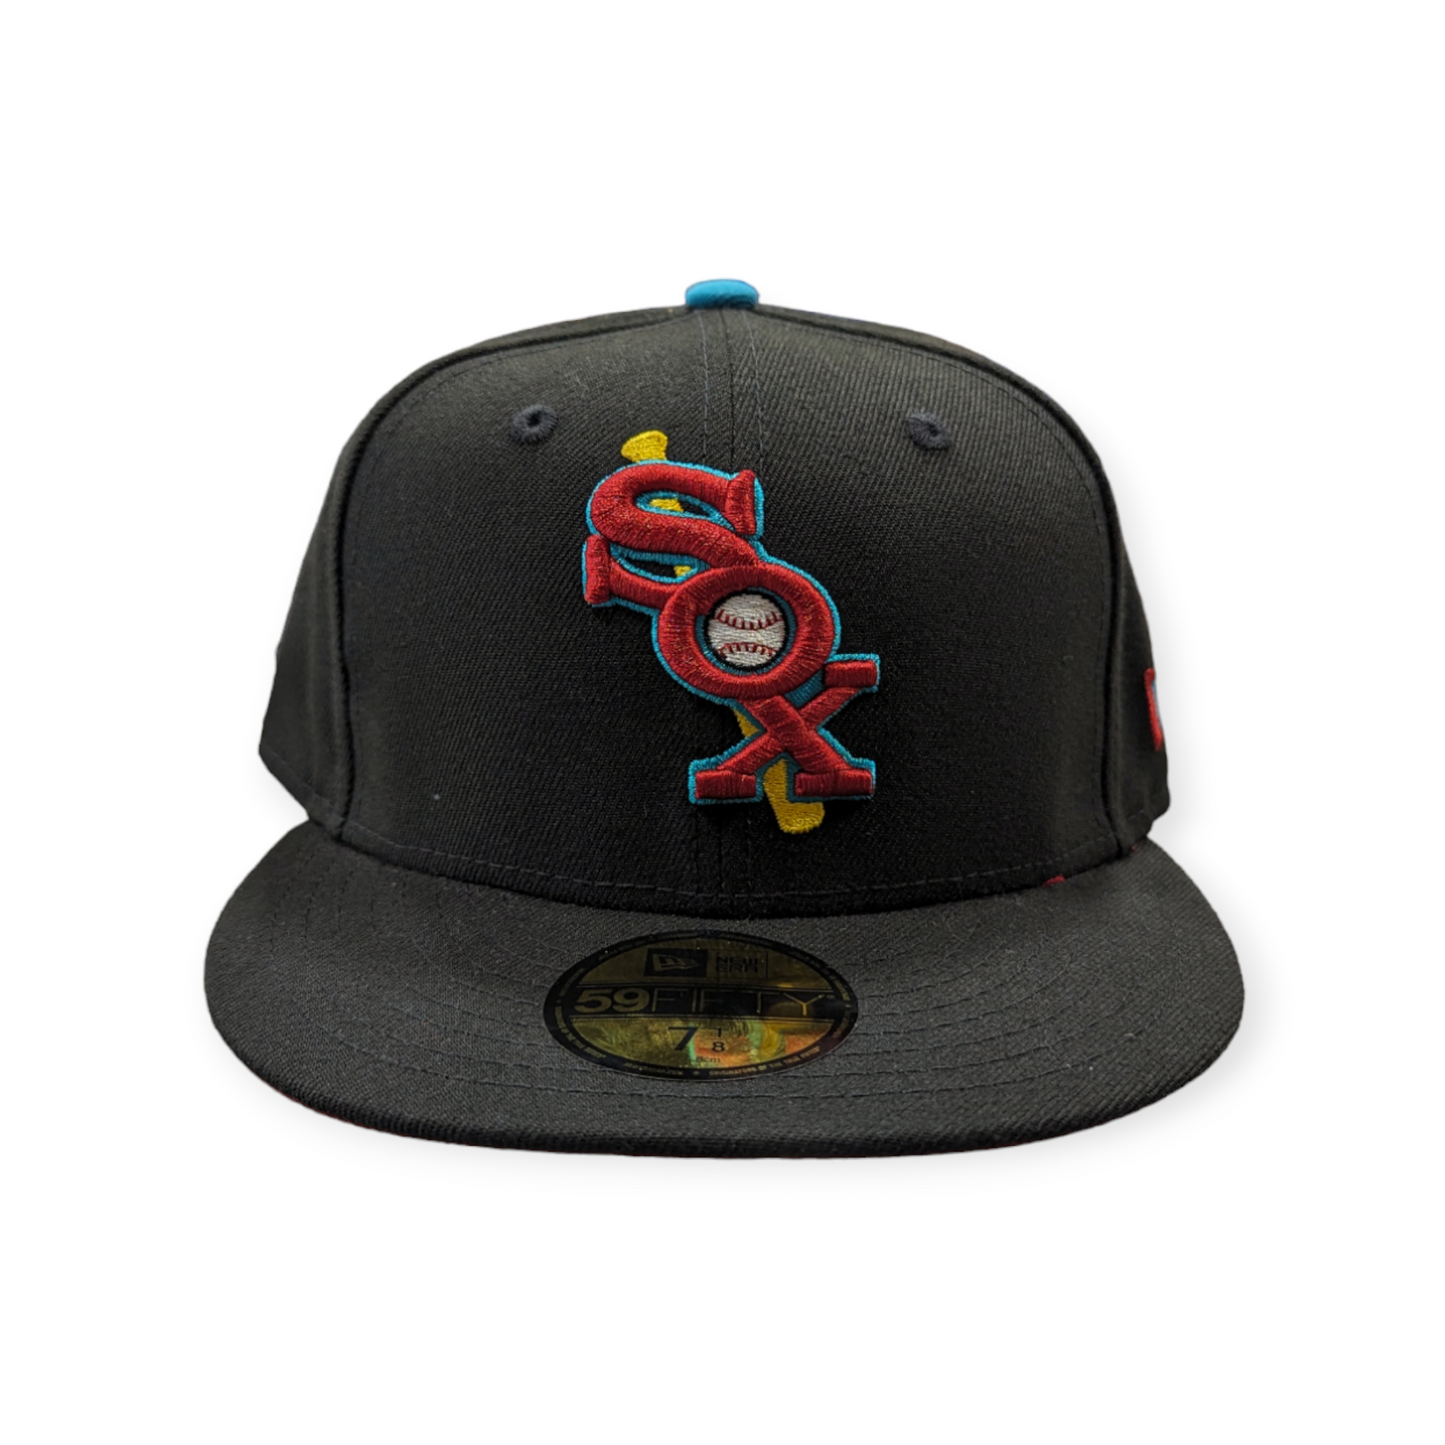 Chicago White Sox New Era Black/Aqua 59FIFTY Fitted Hat